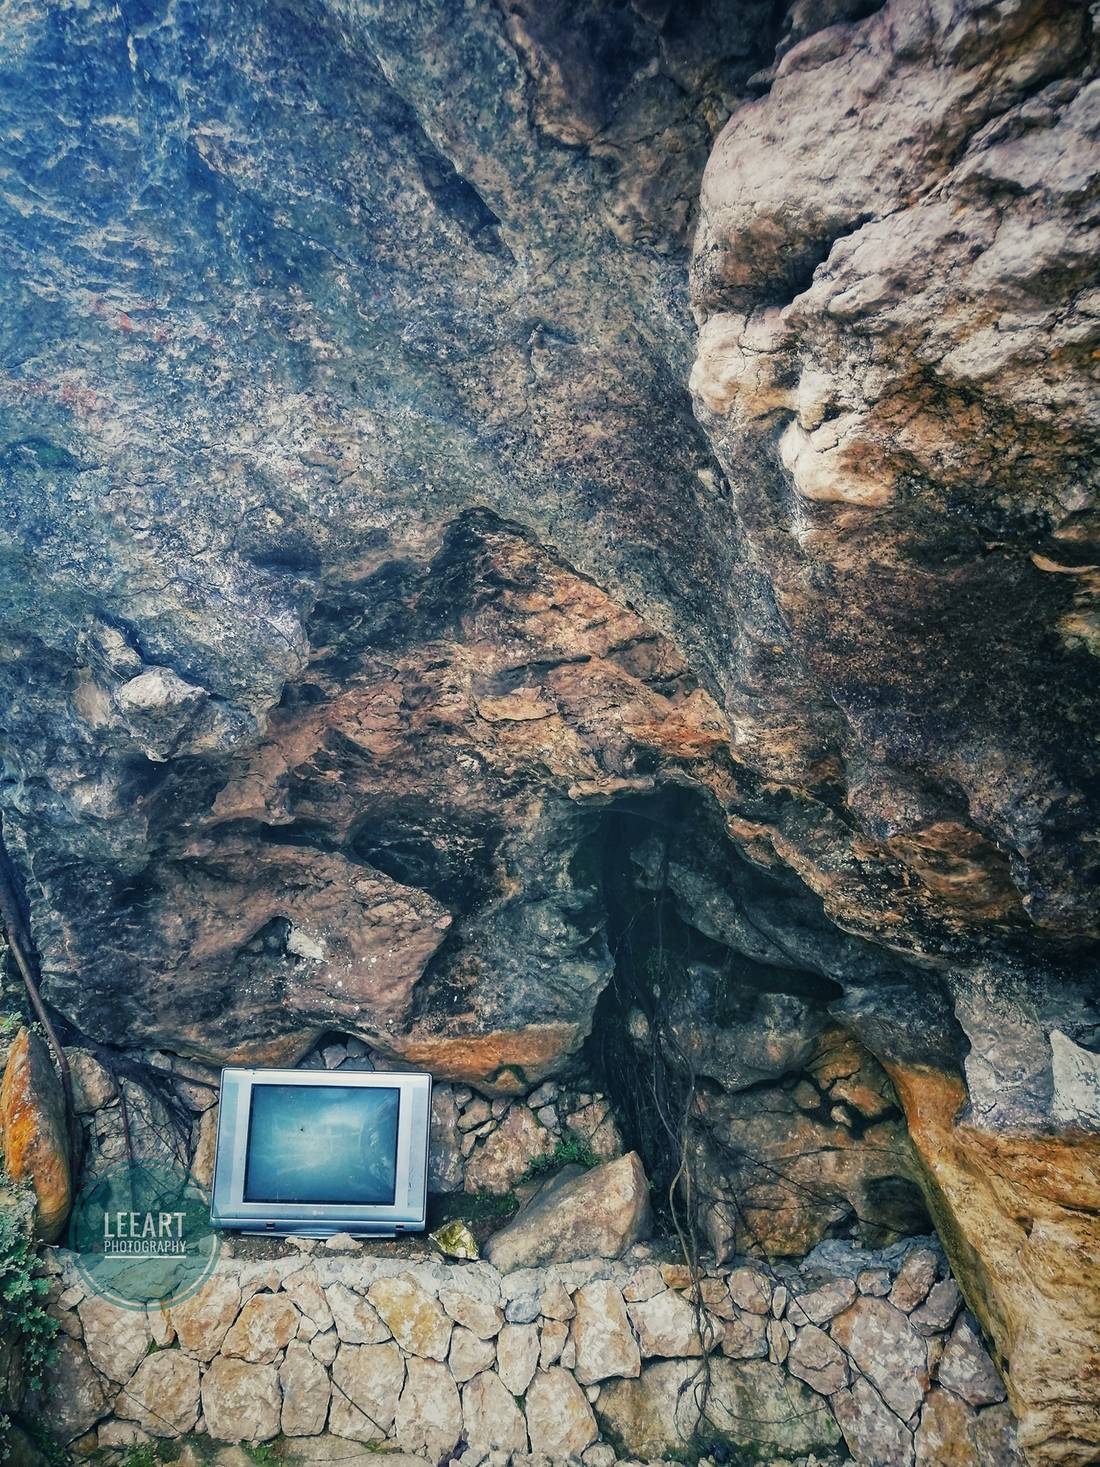 I’m curious as to why an old TV was placed there. When you look at the rocks, there are so many faces and figures that can be formed. The more you look, the more you’ll see. Just let your eyes and your mind relax. Maybe the TV is connected with those.